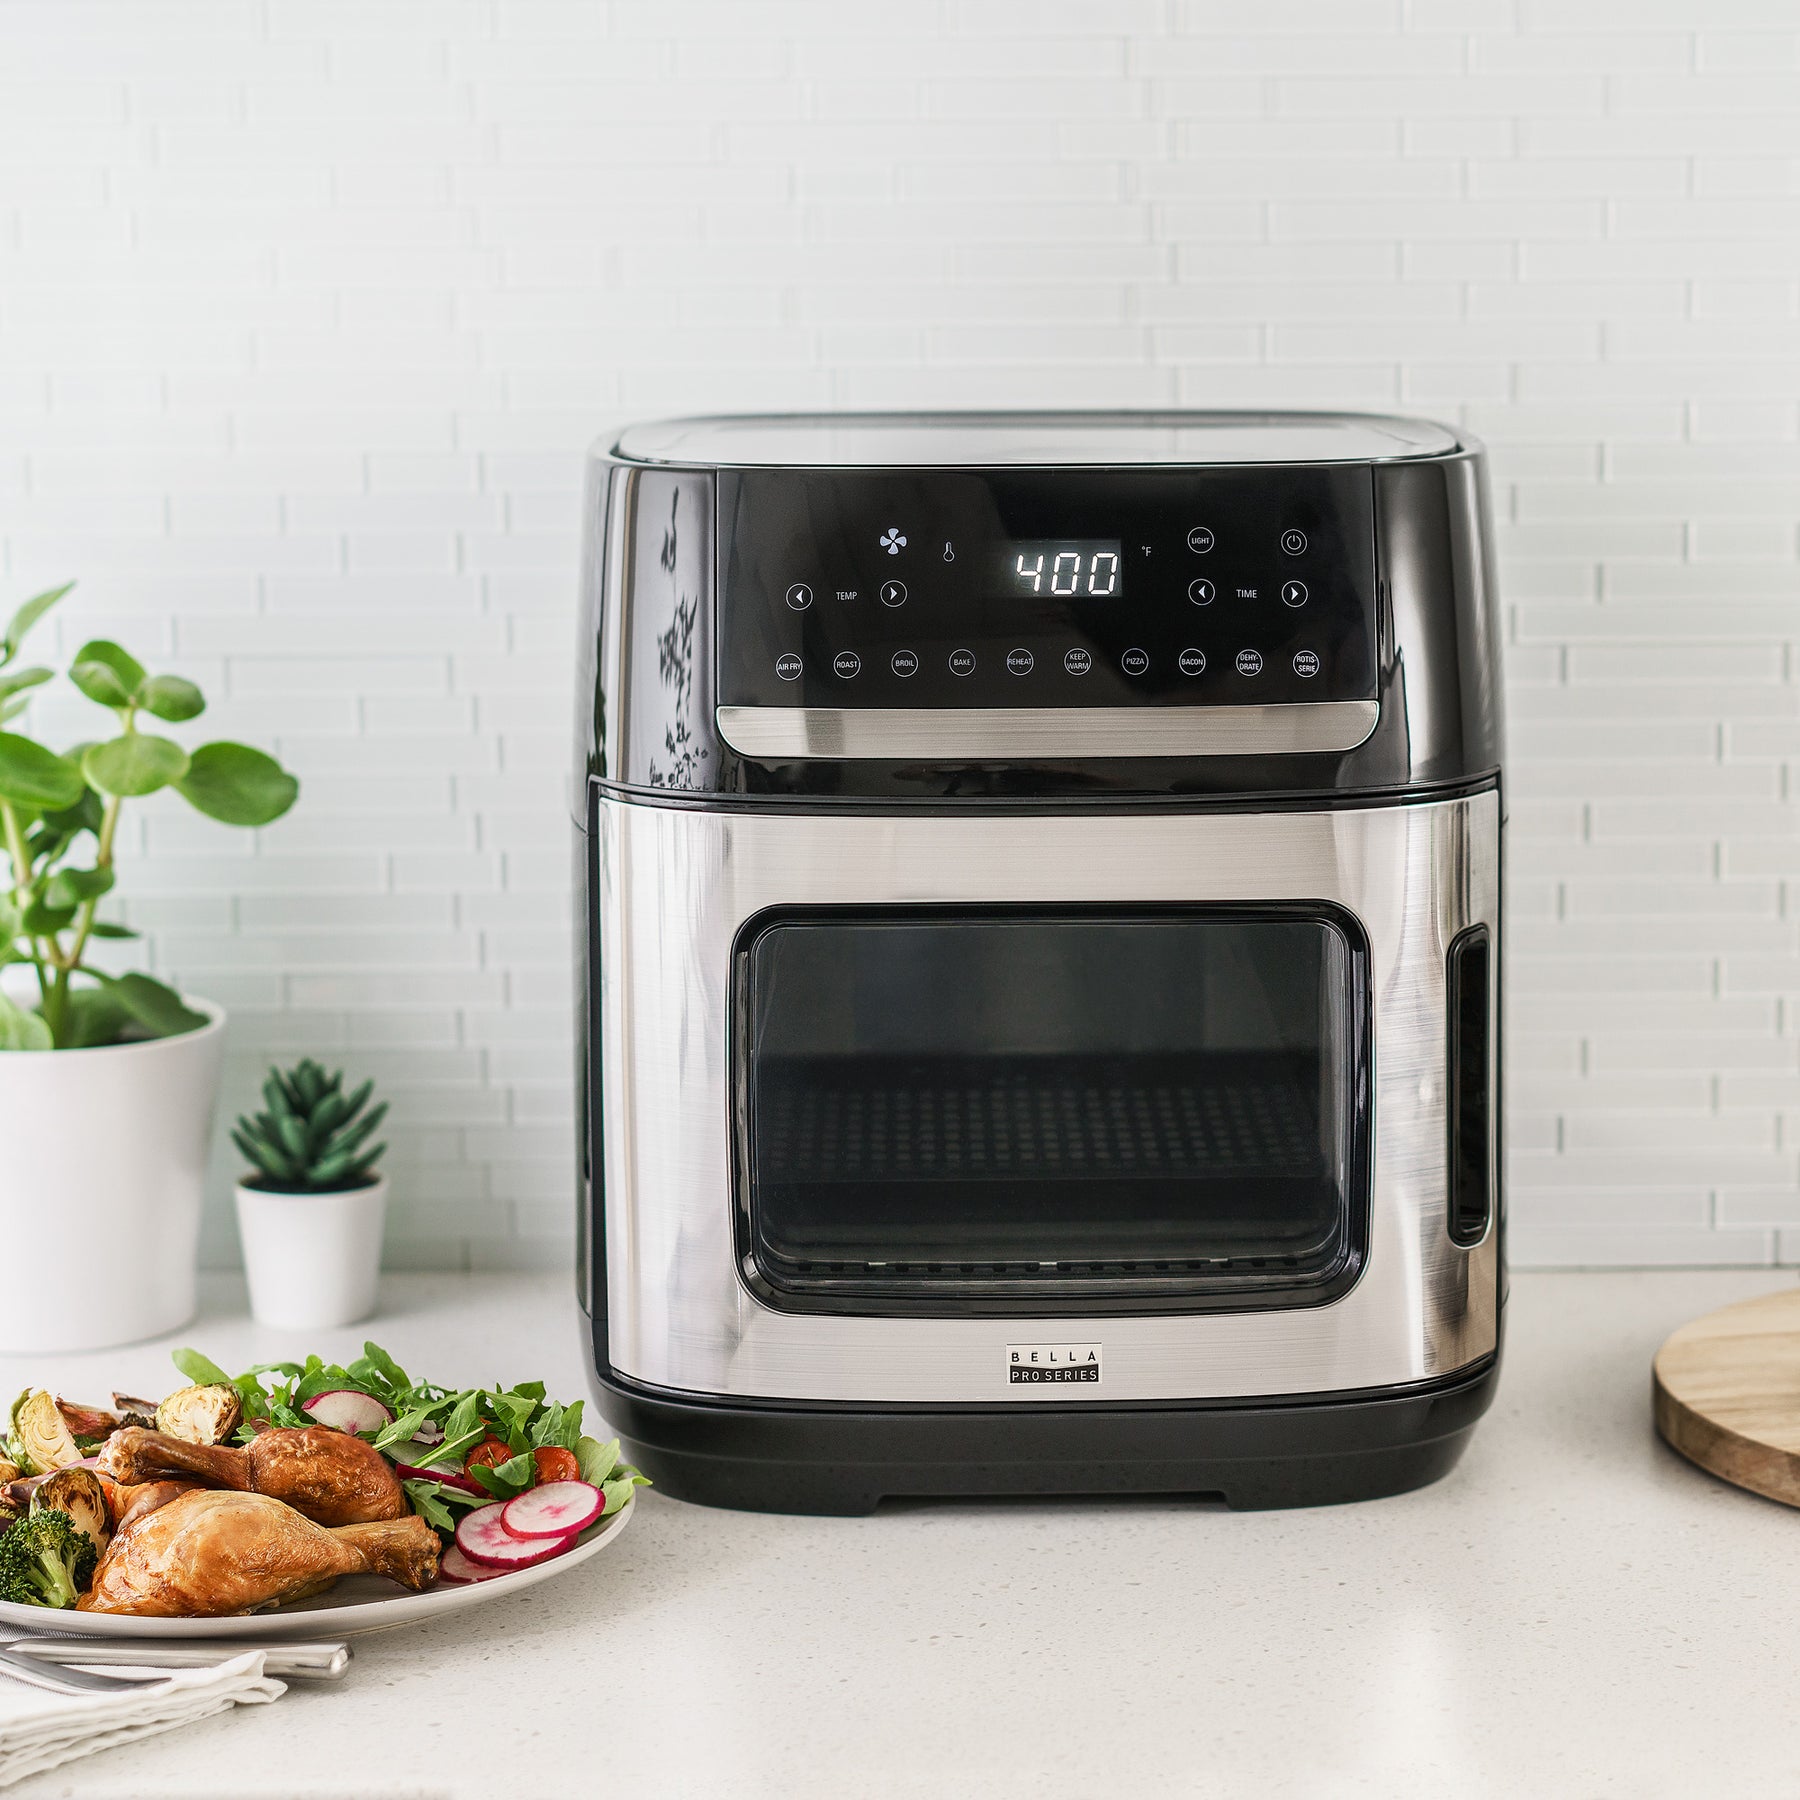 12.6-qt. Digital Air Fryer Oven - Stainless Steel